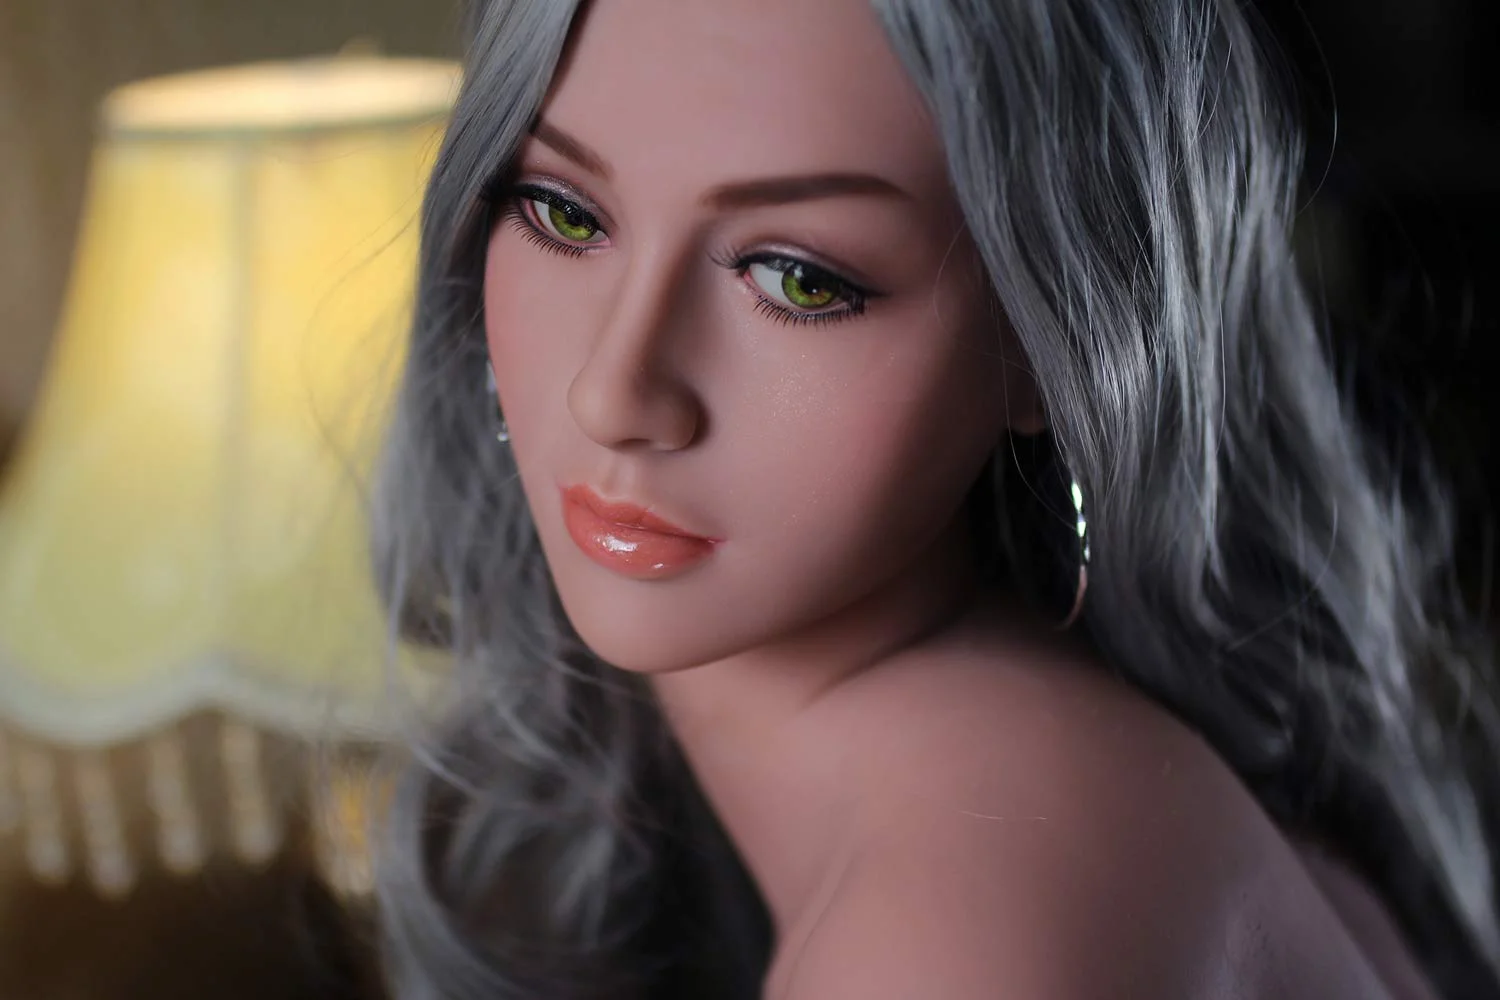 Sex doll with silver earrings